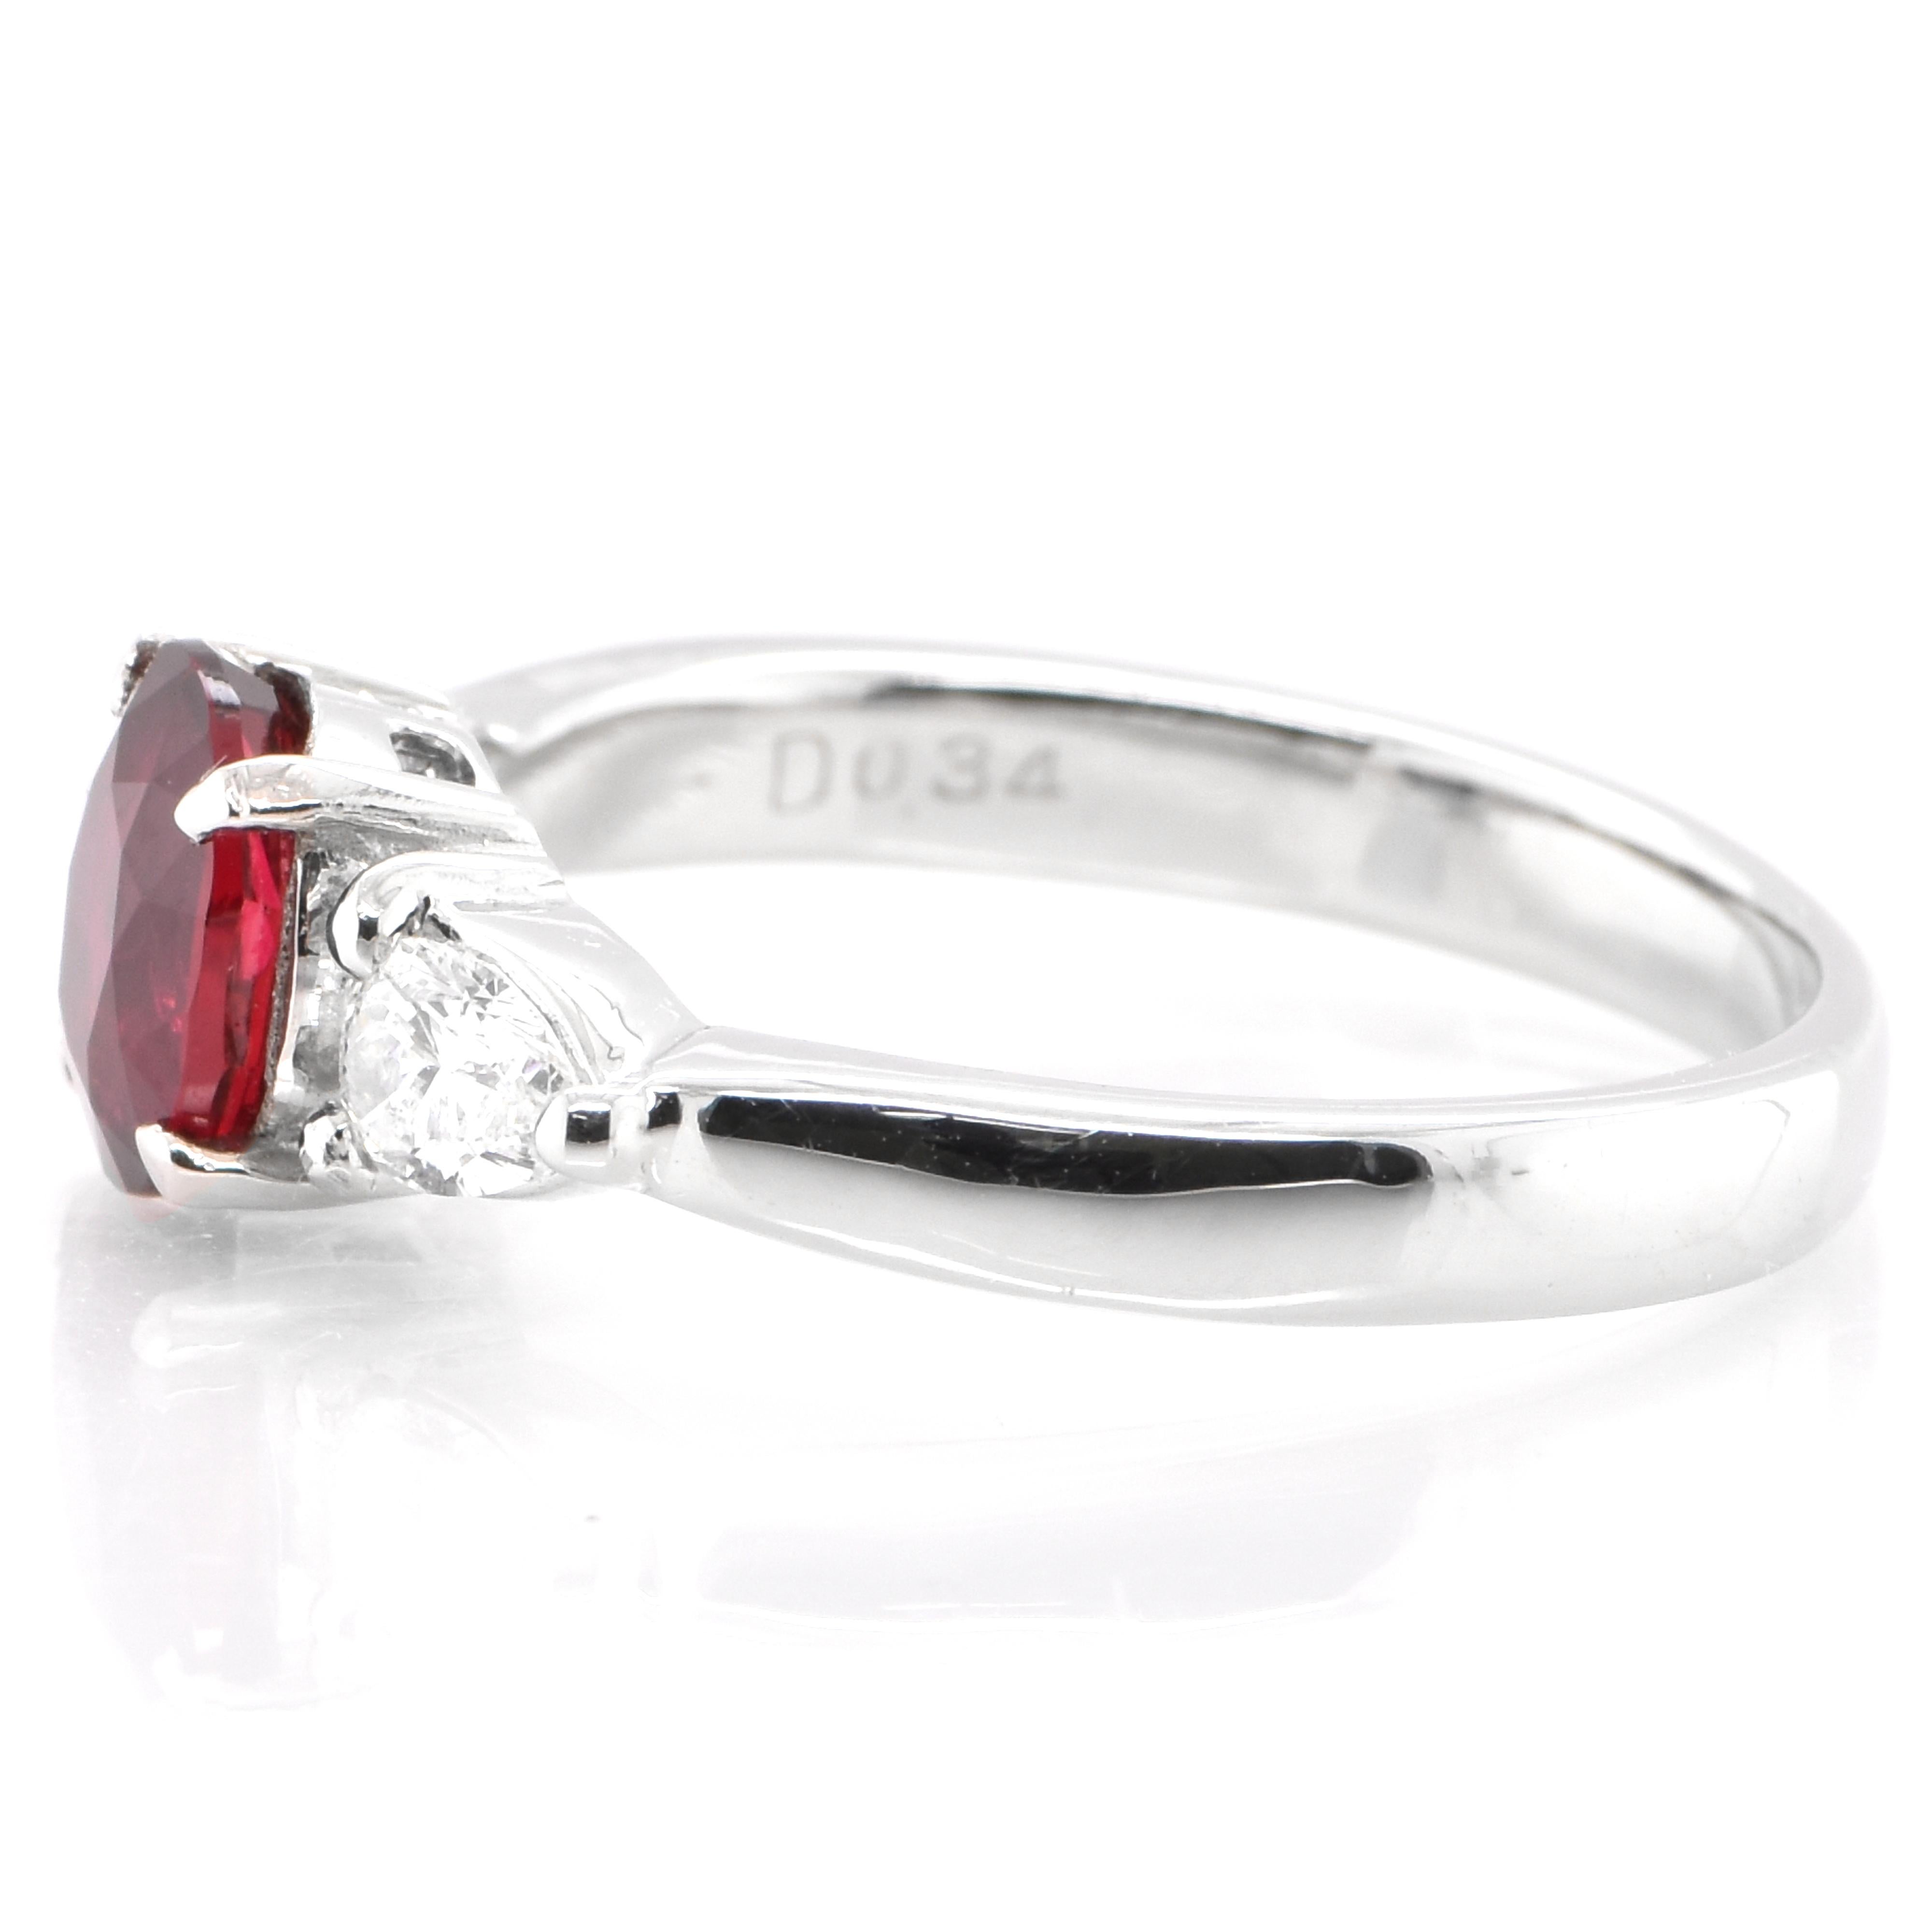 Oval Cut 1.08 Carat Natural Ruby and Diamond Three-Stone Ring Set in Platinum